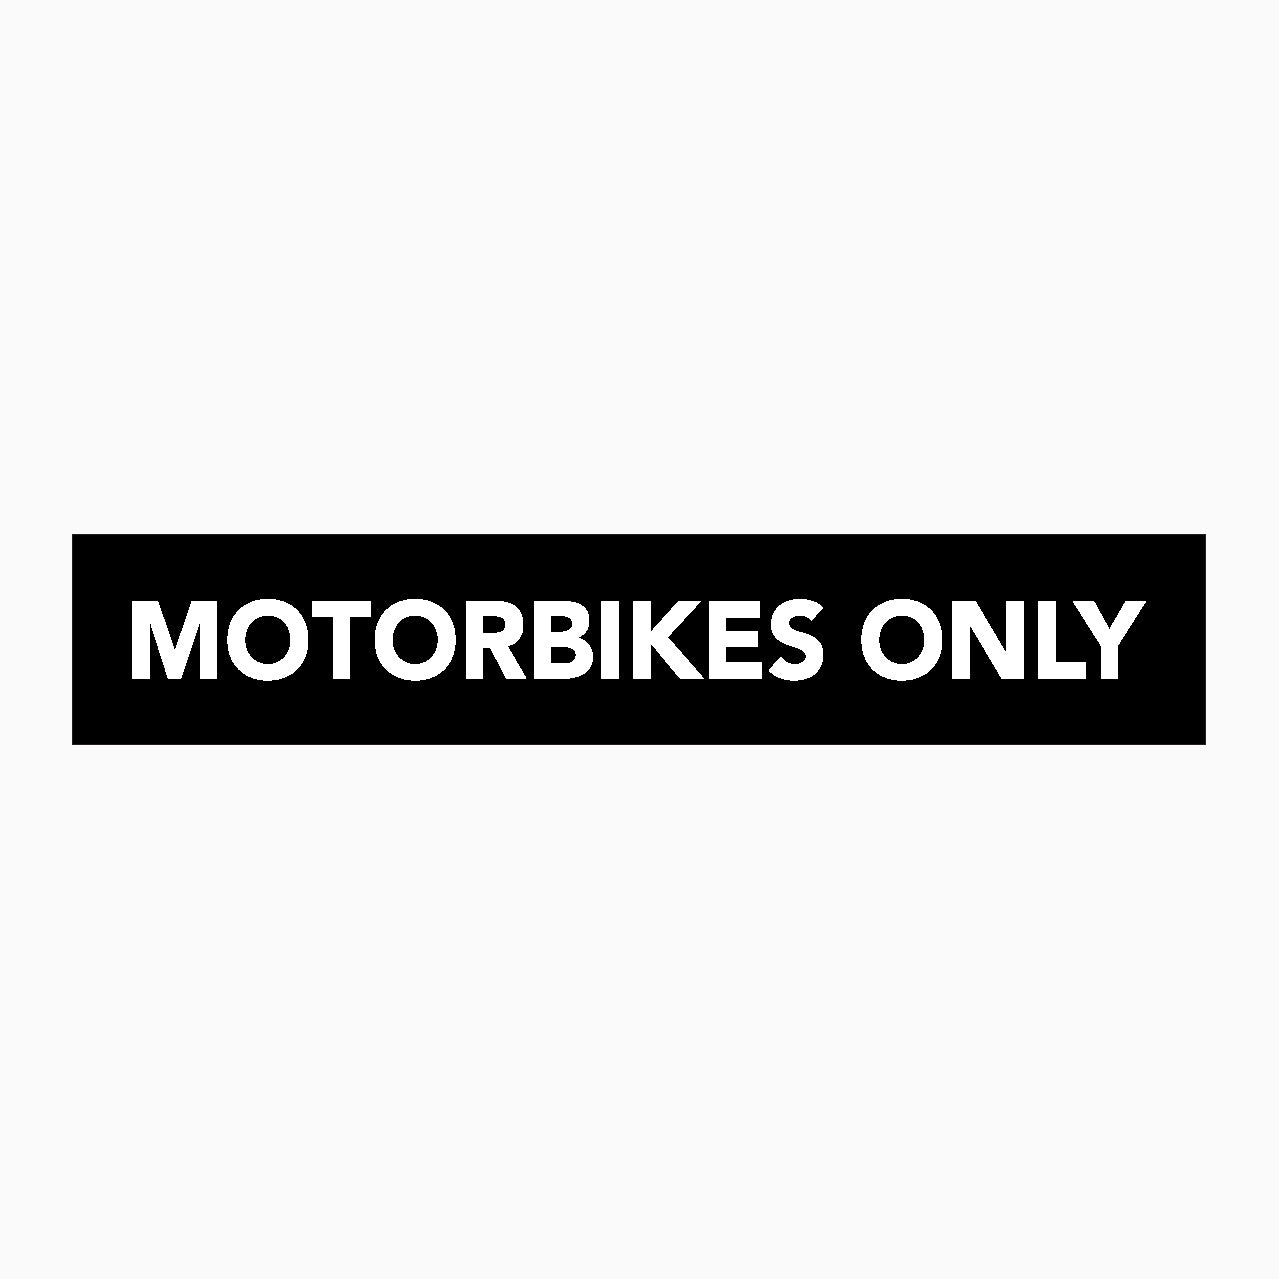 MOTORBIKES ONLY SIGN - STATUTORY SIGN